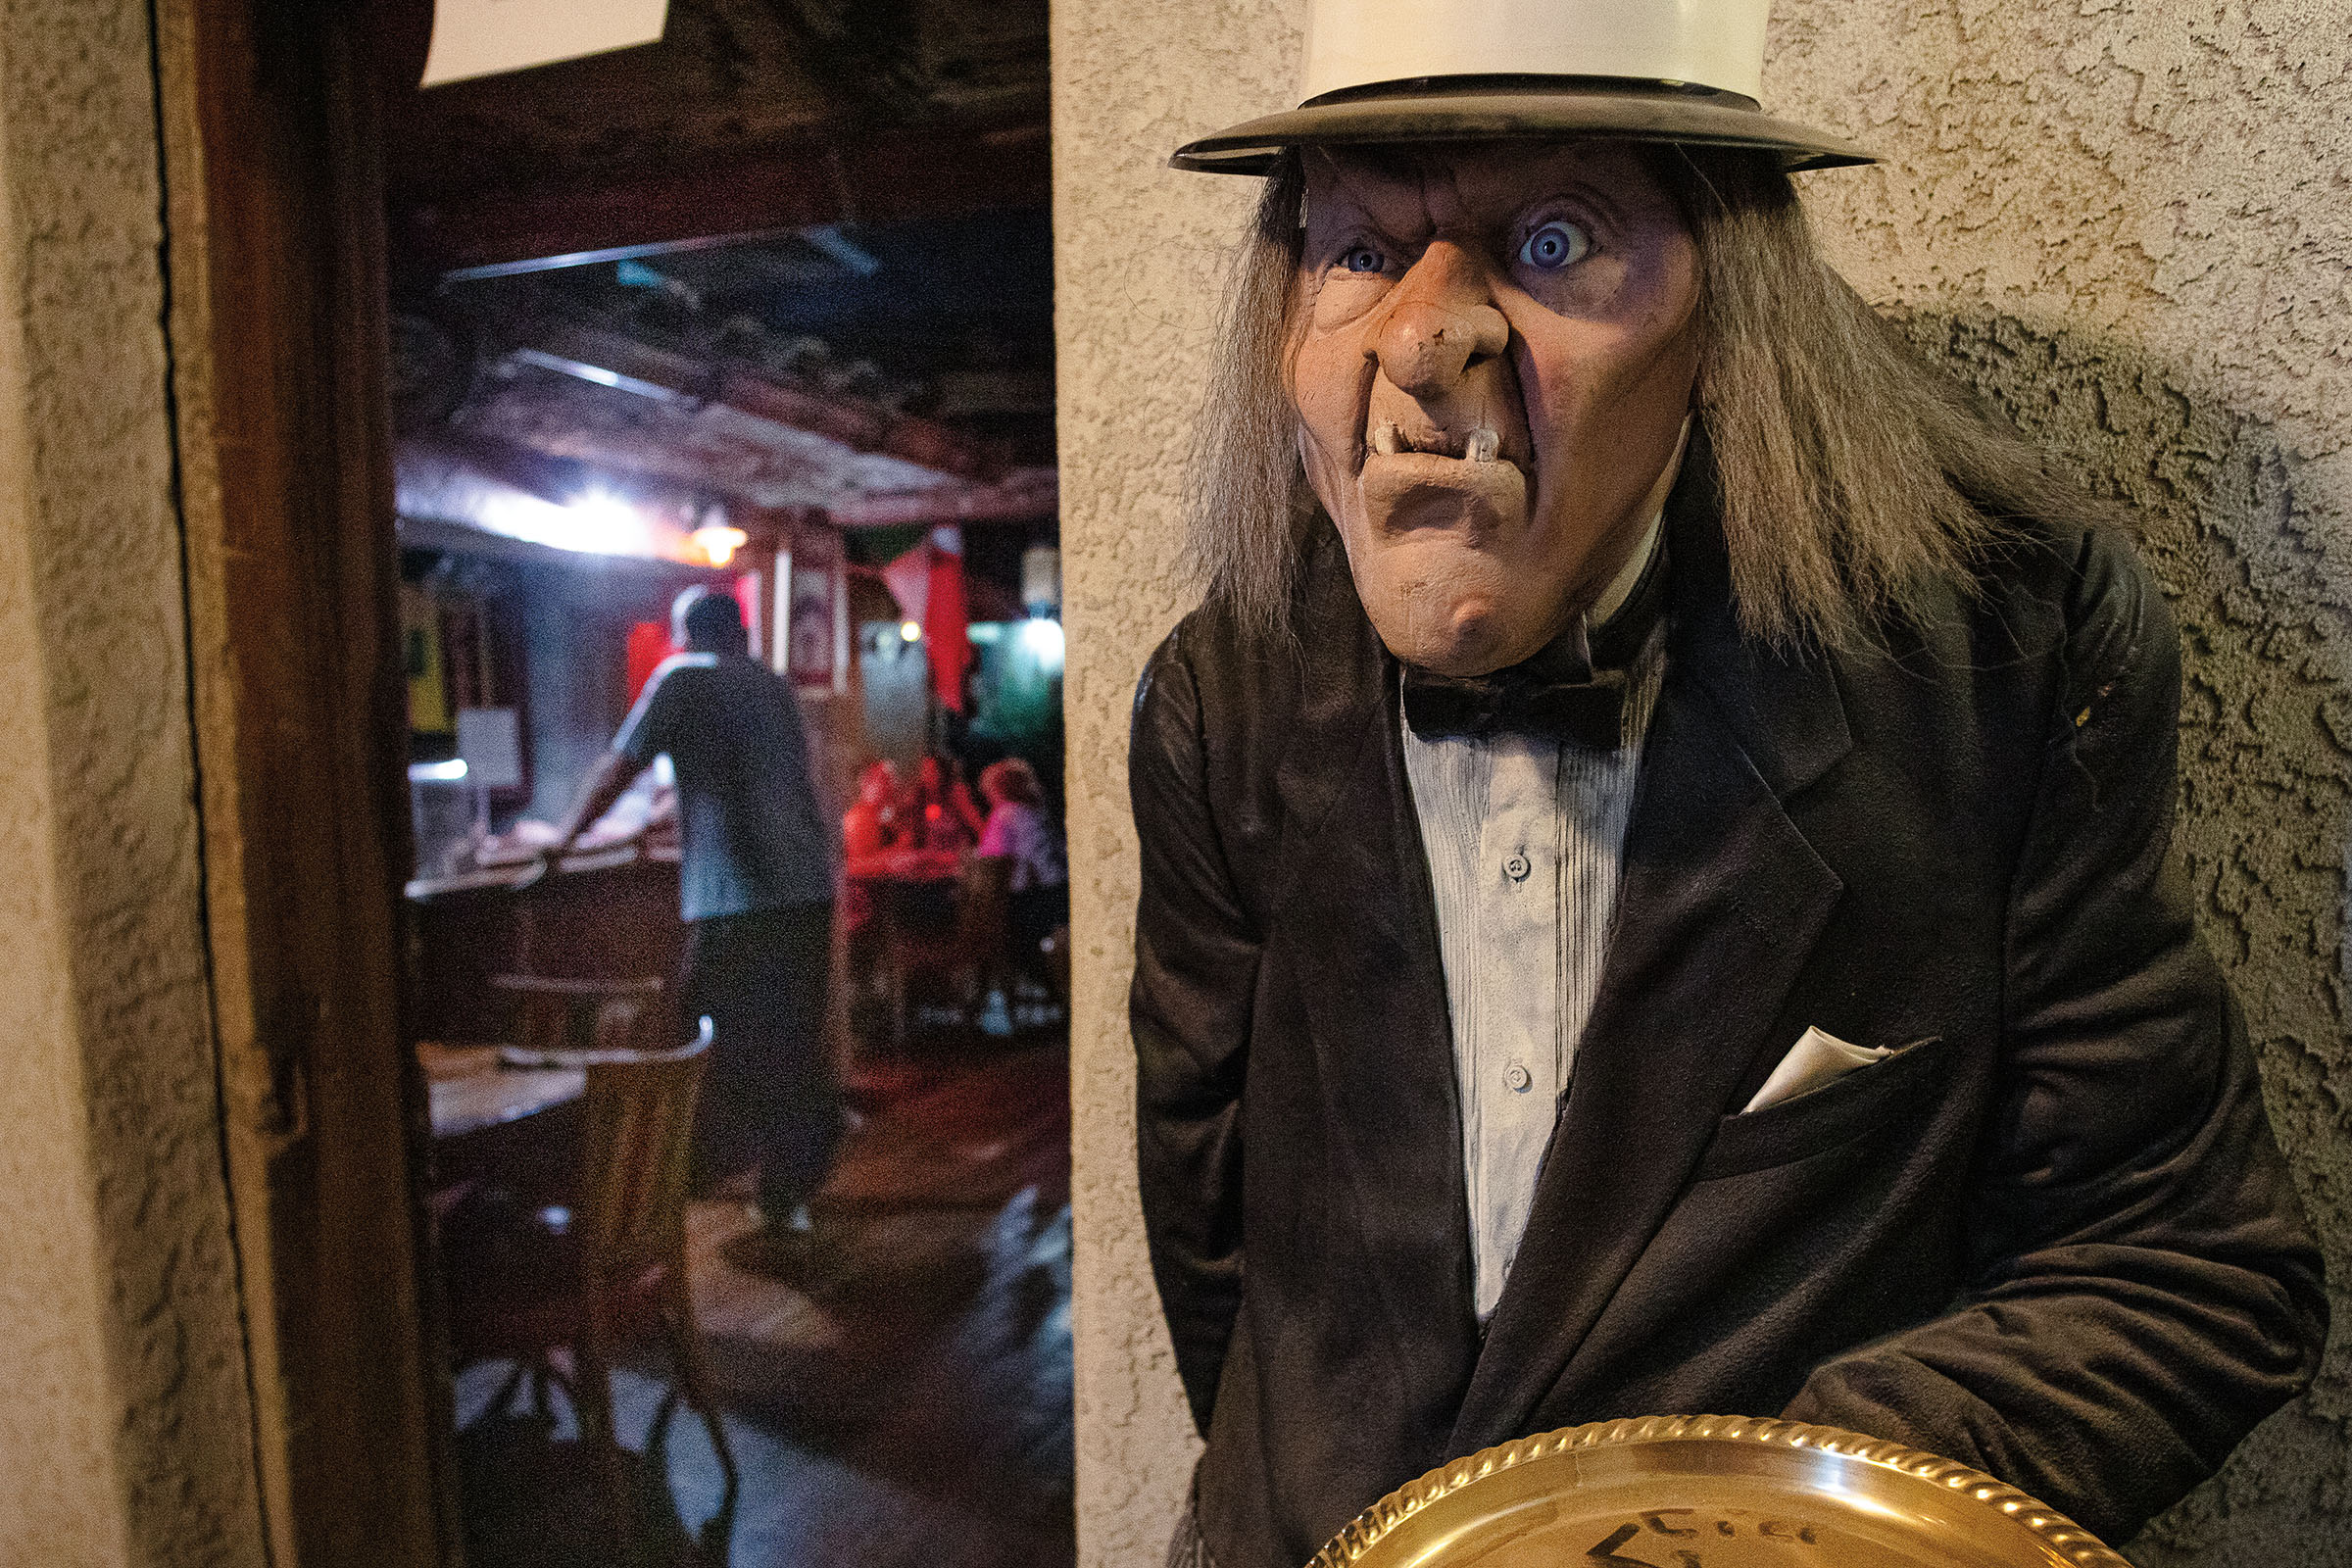 A wax sculpture of a scary-looking man with long hair and a hat near the exterior of a room